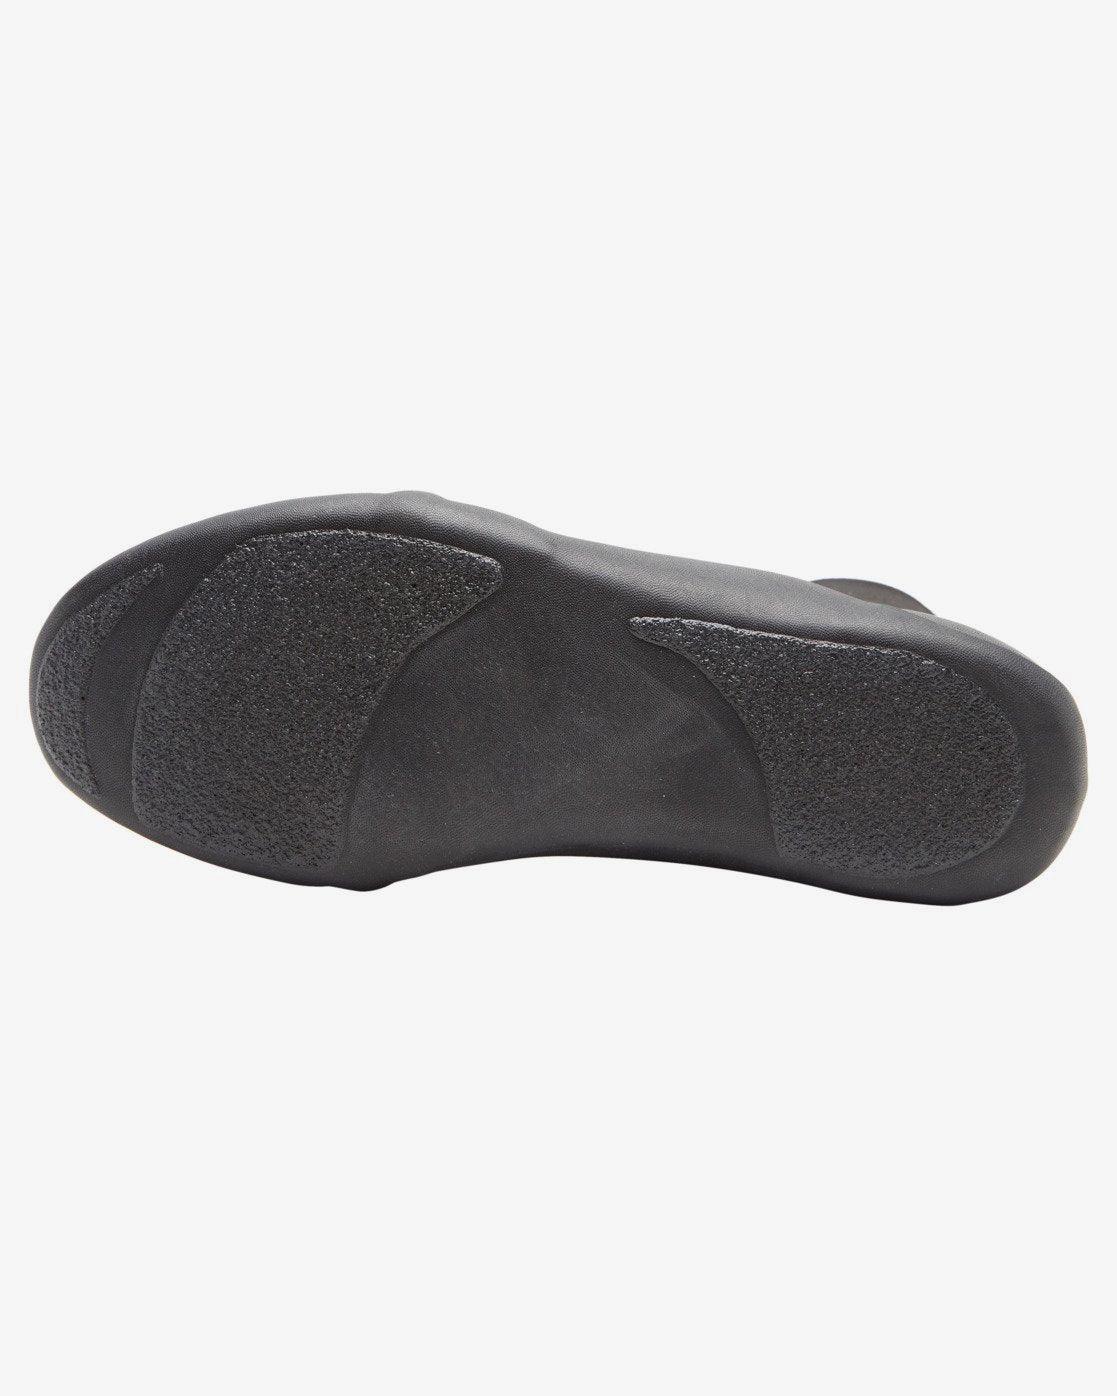 5mm Absolute Round Toe Wetsuit Booties - SoHa Surf Shop